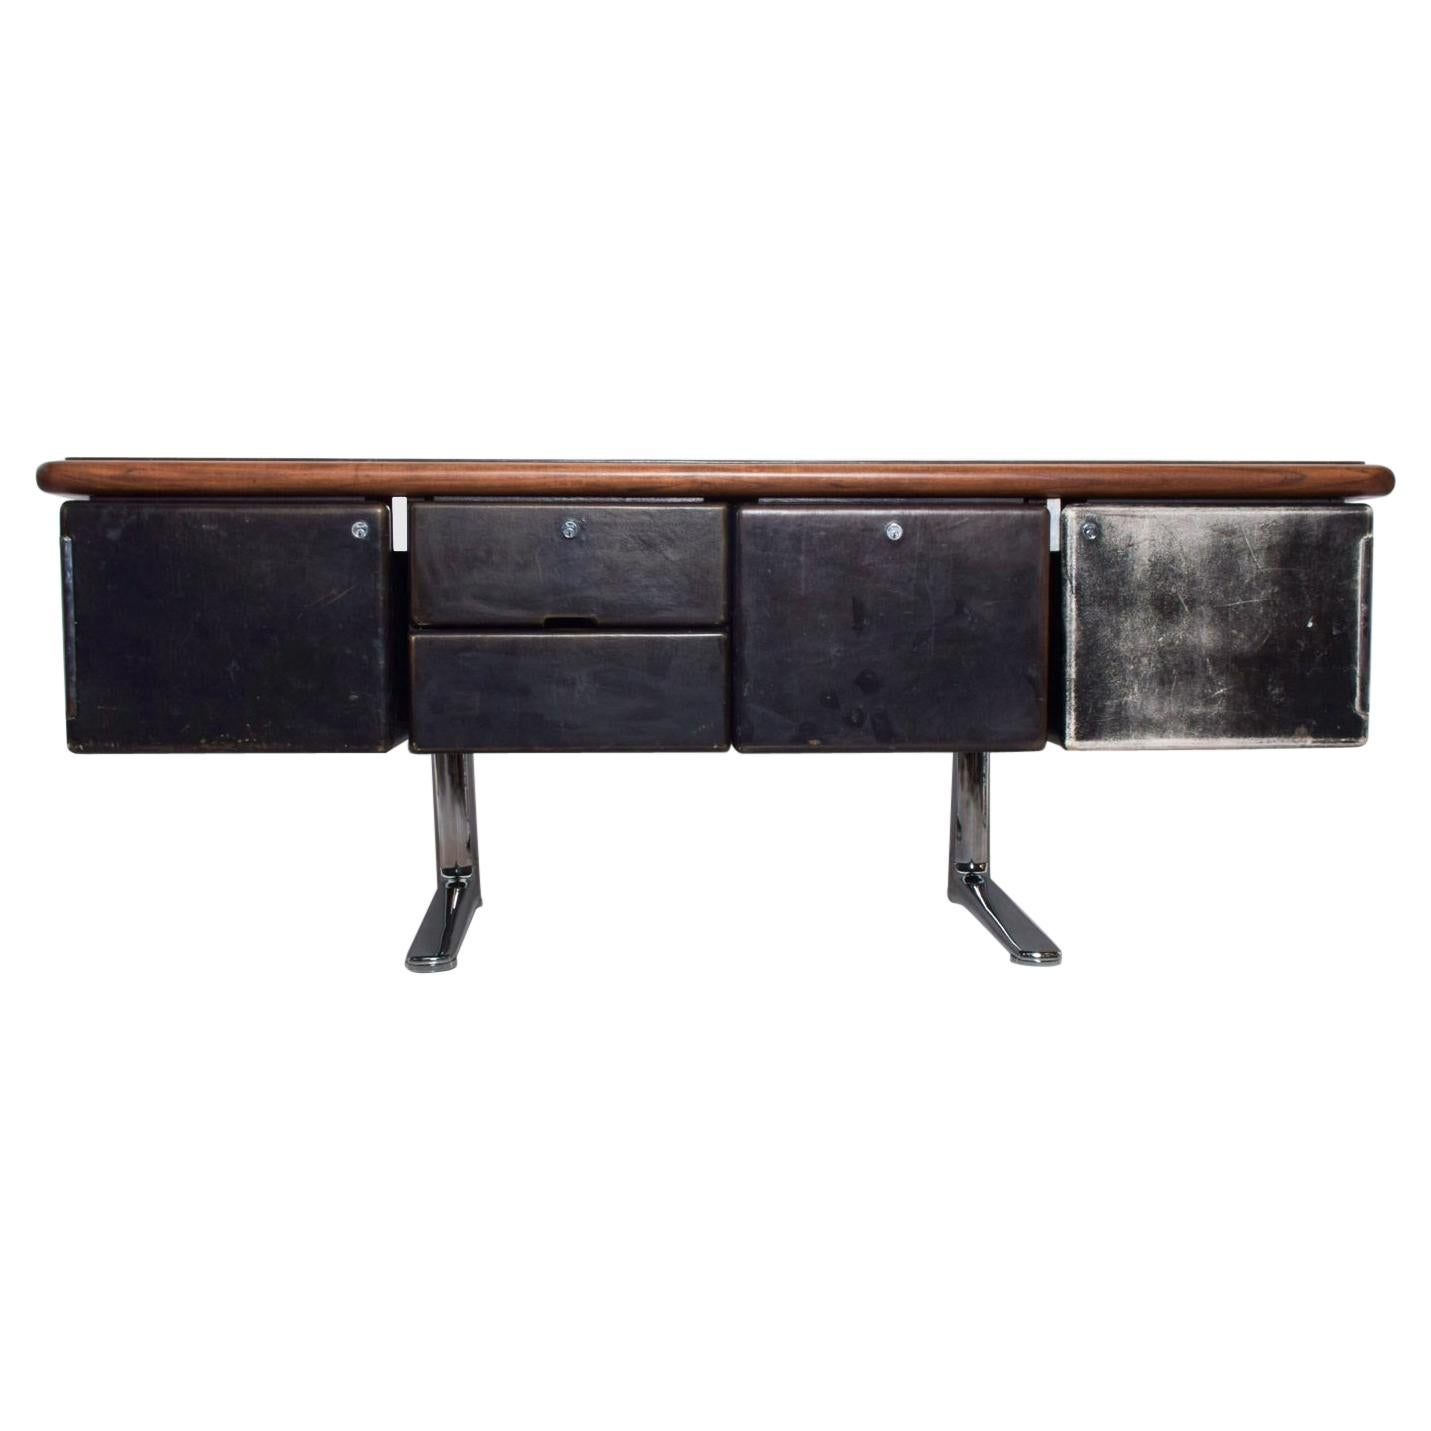 1965 Massive Executive Leather Sideboard Credenza by Warren Platner for Knoll